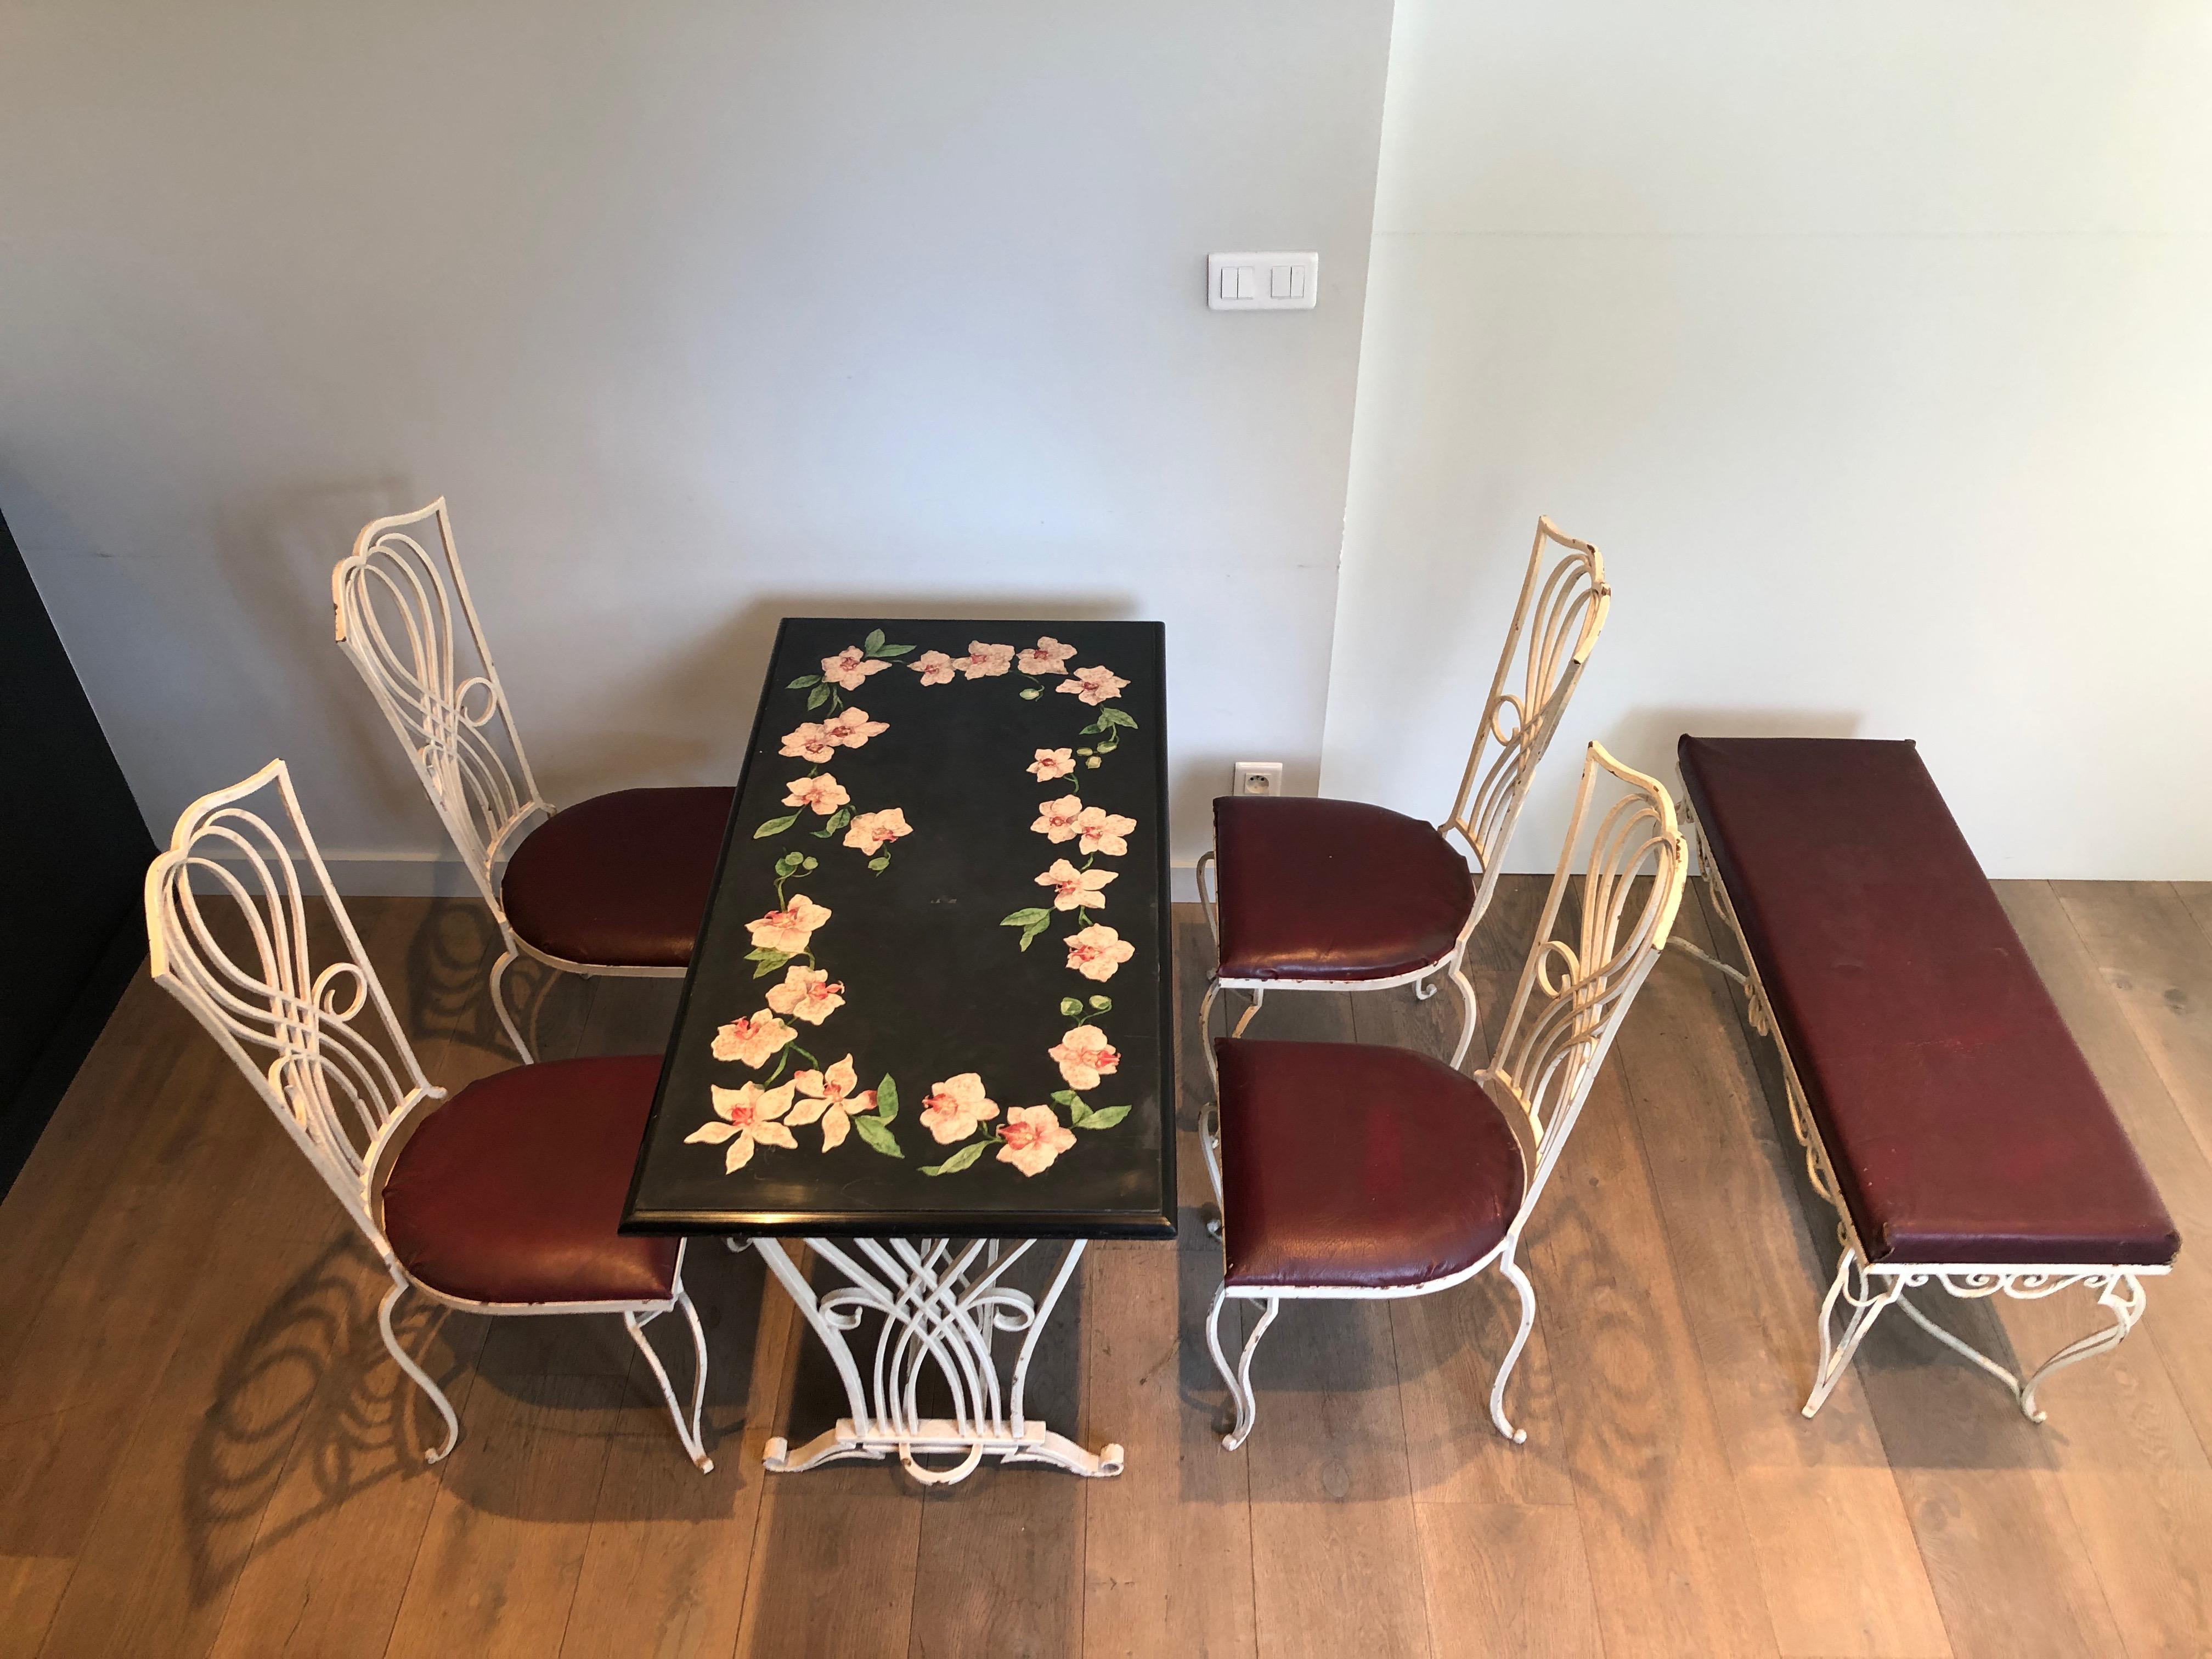 Set of garden furniture composed of a table made of wrought iron and signed Scagliola marble top, 4 chairs and a bench. French Work in the style of René Prou. Circa 1940